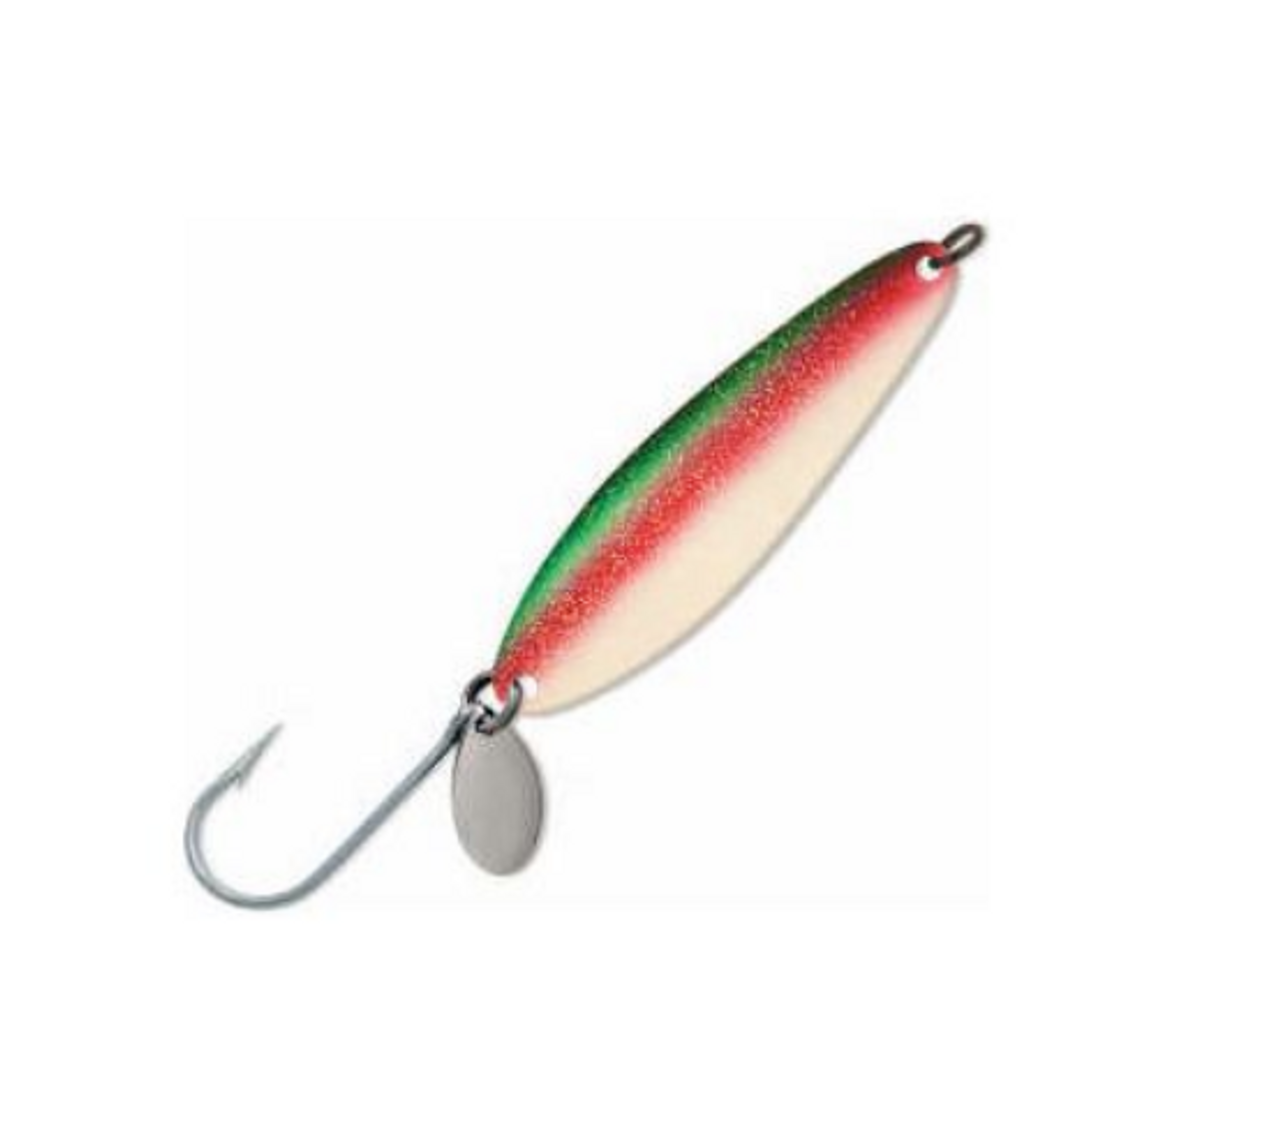 Luhr Jensen Coyote Spoon - Glo Night Rider - The Harbour Chandler